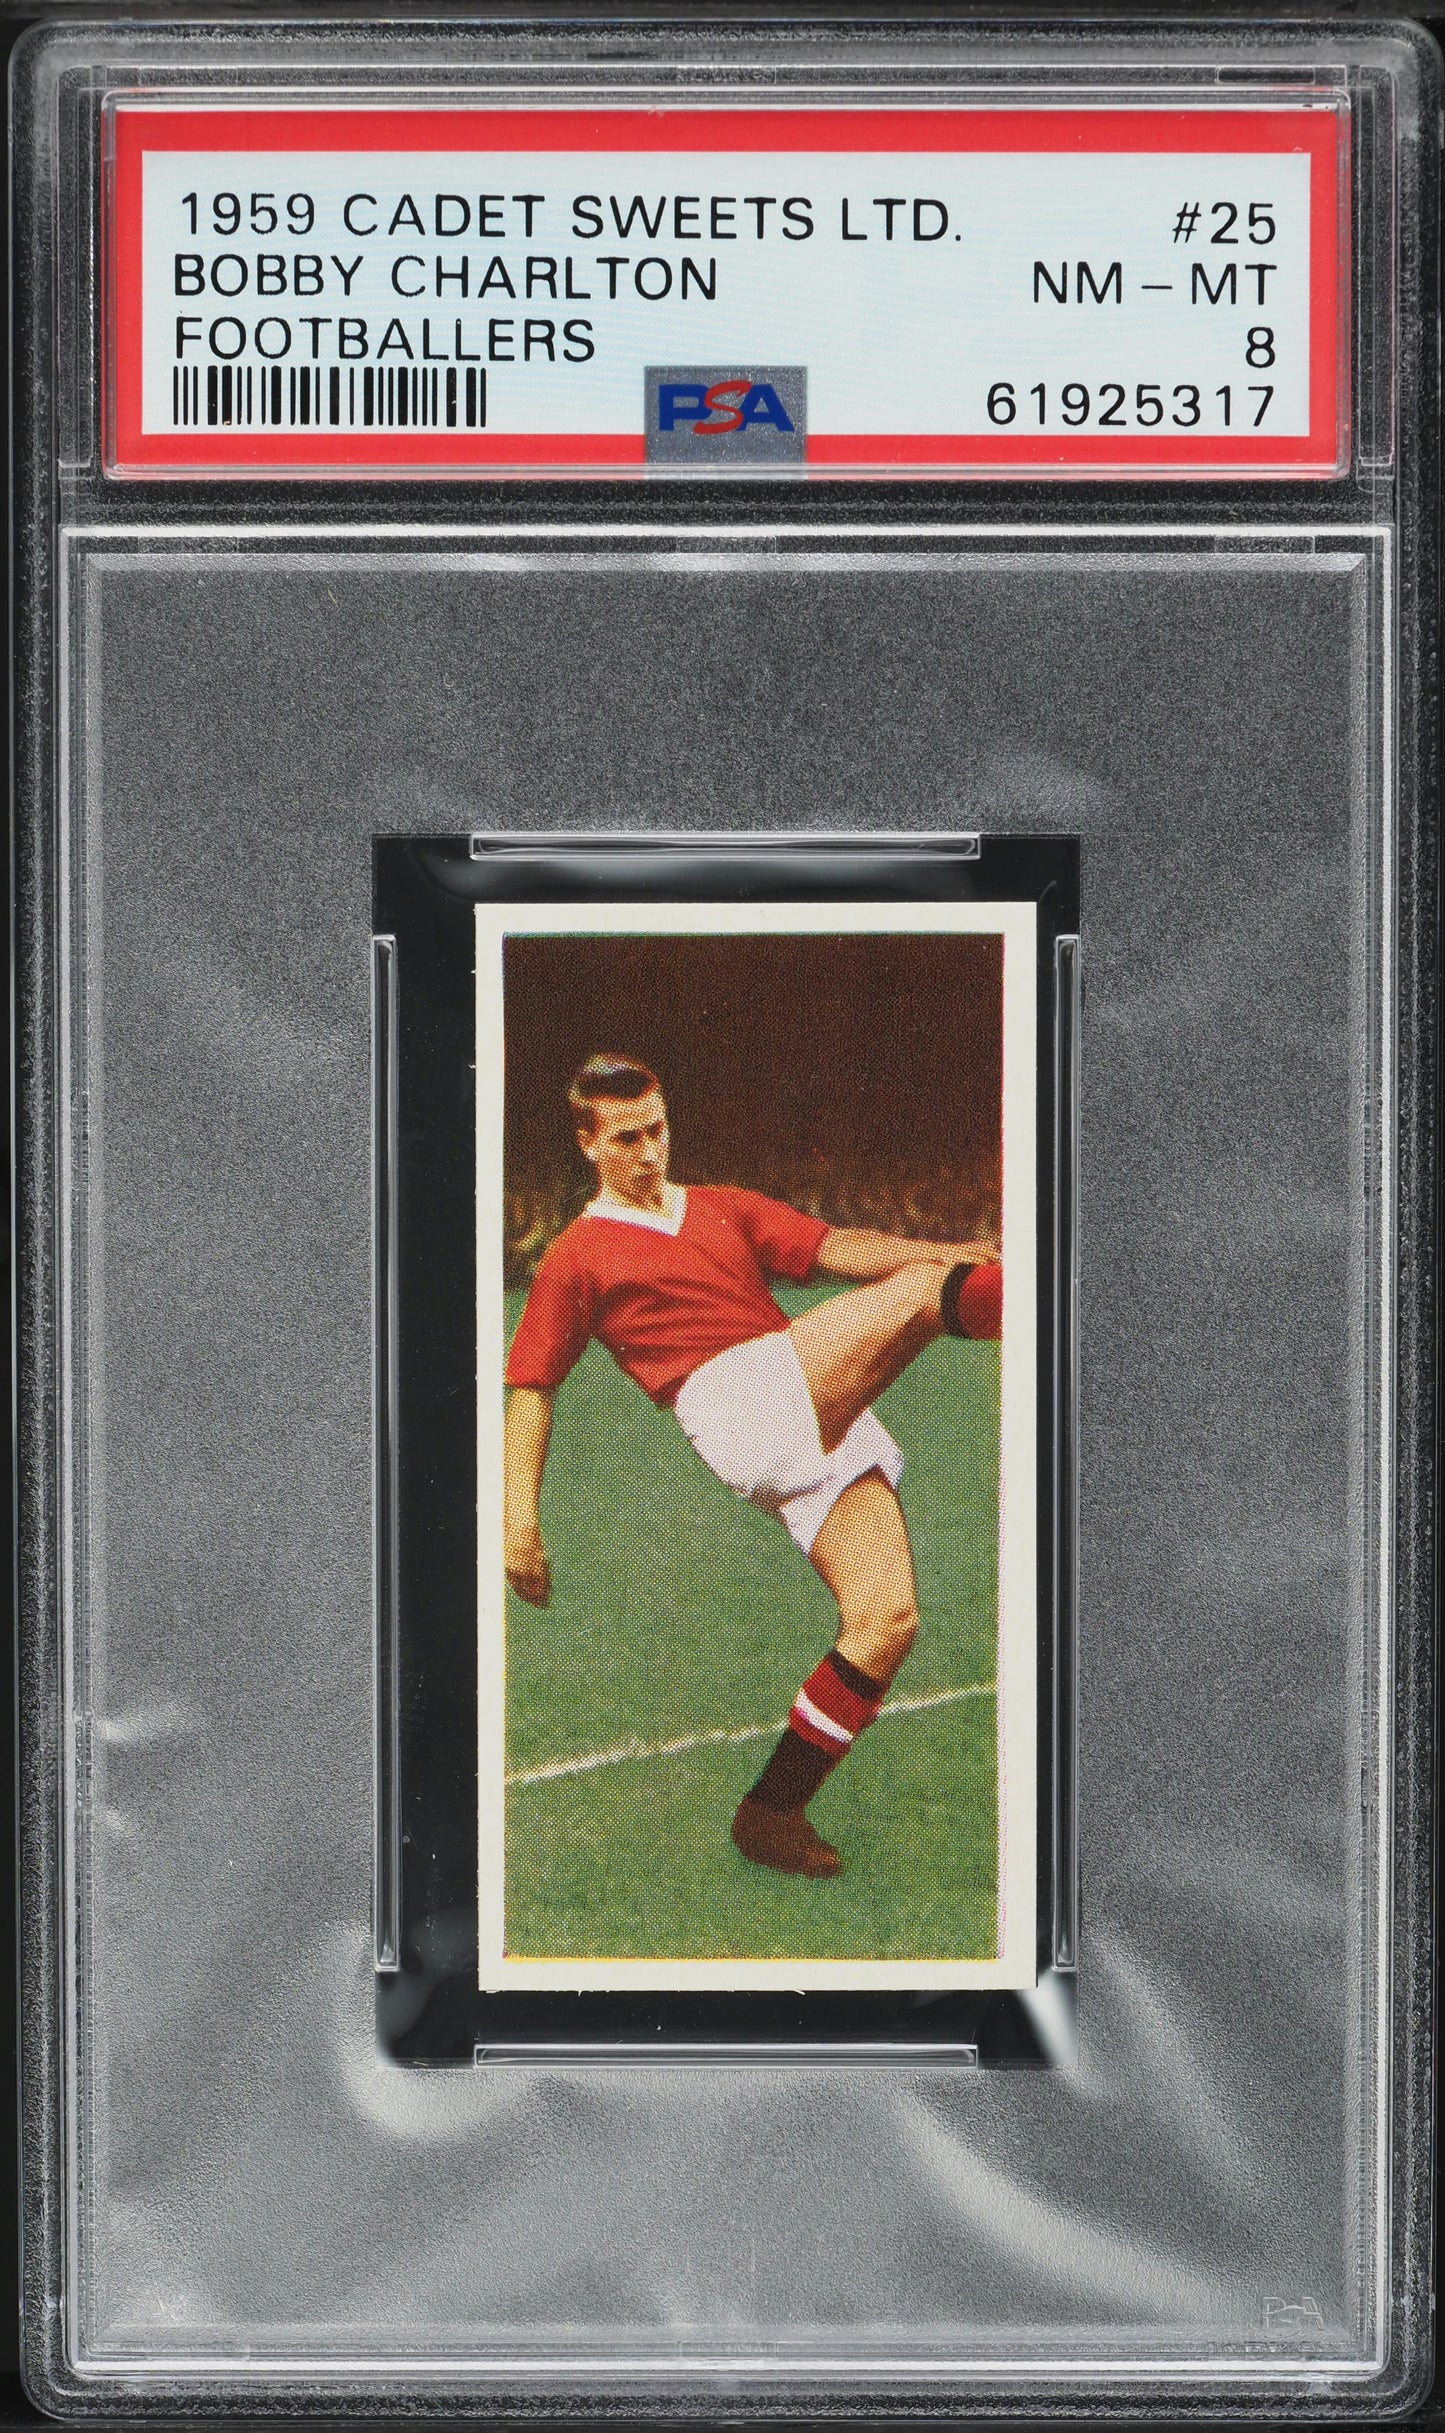 1959 CADET SWEETS FOOTBALLERS BOBBY CHARLTON ROOKIE #25 PSA 8 NM-MT